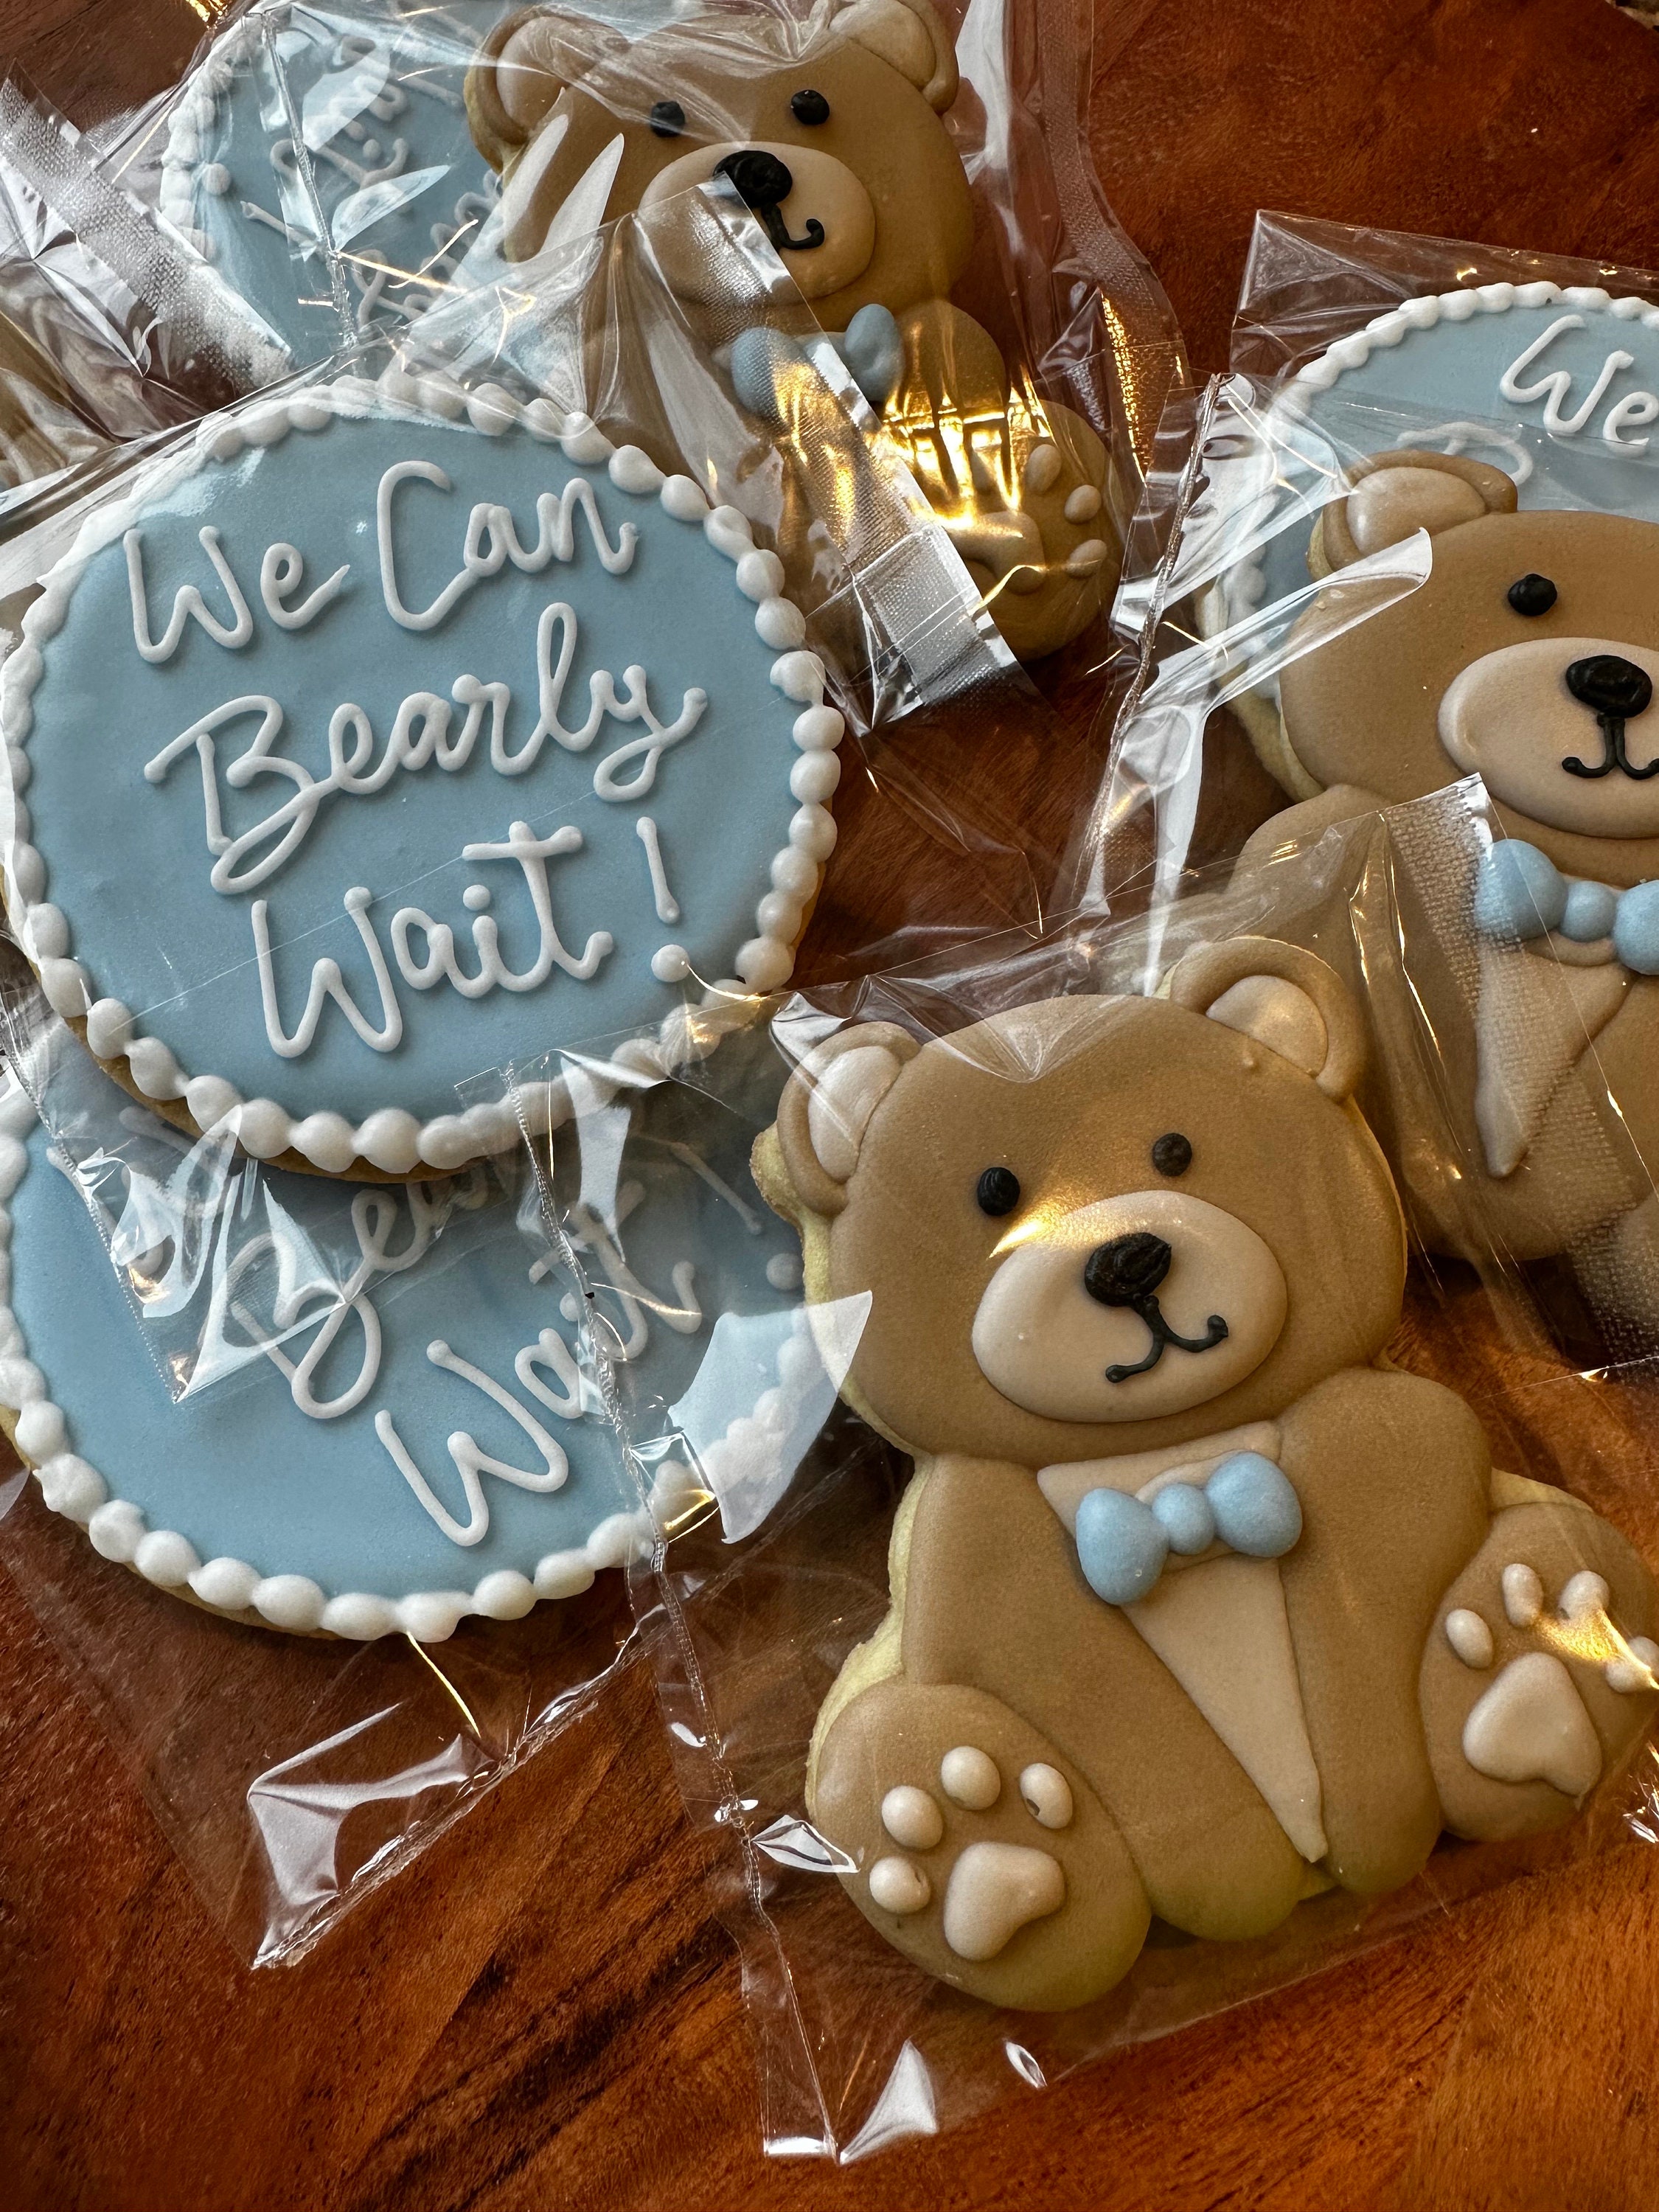 We Can Bearly Wait Baby Shower Decorations, Girl Baby Shower, Confetti